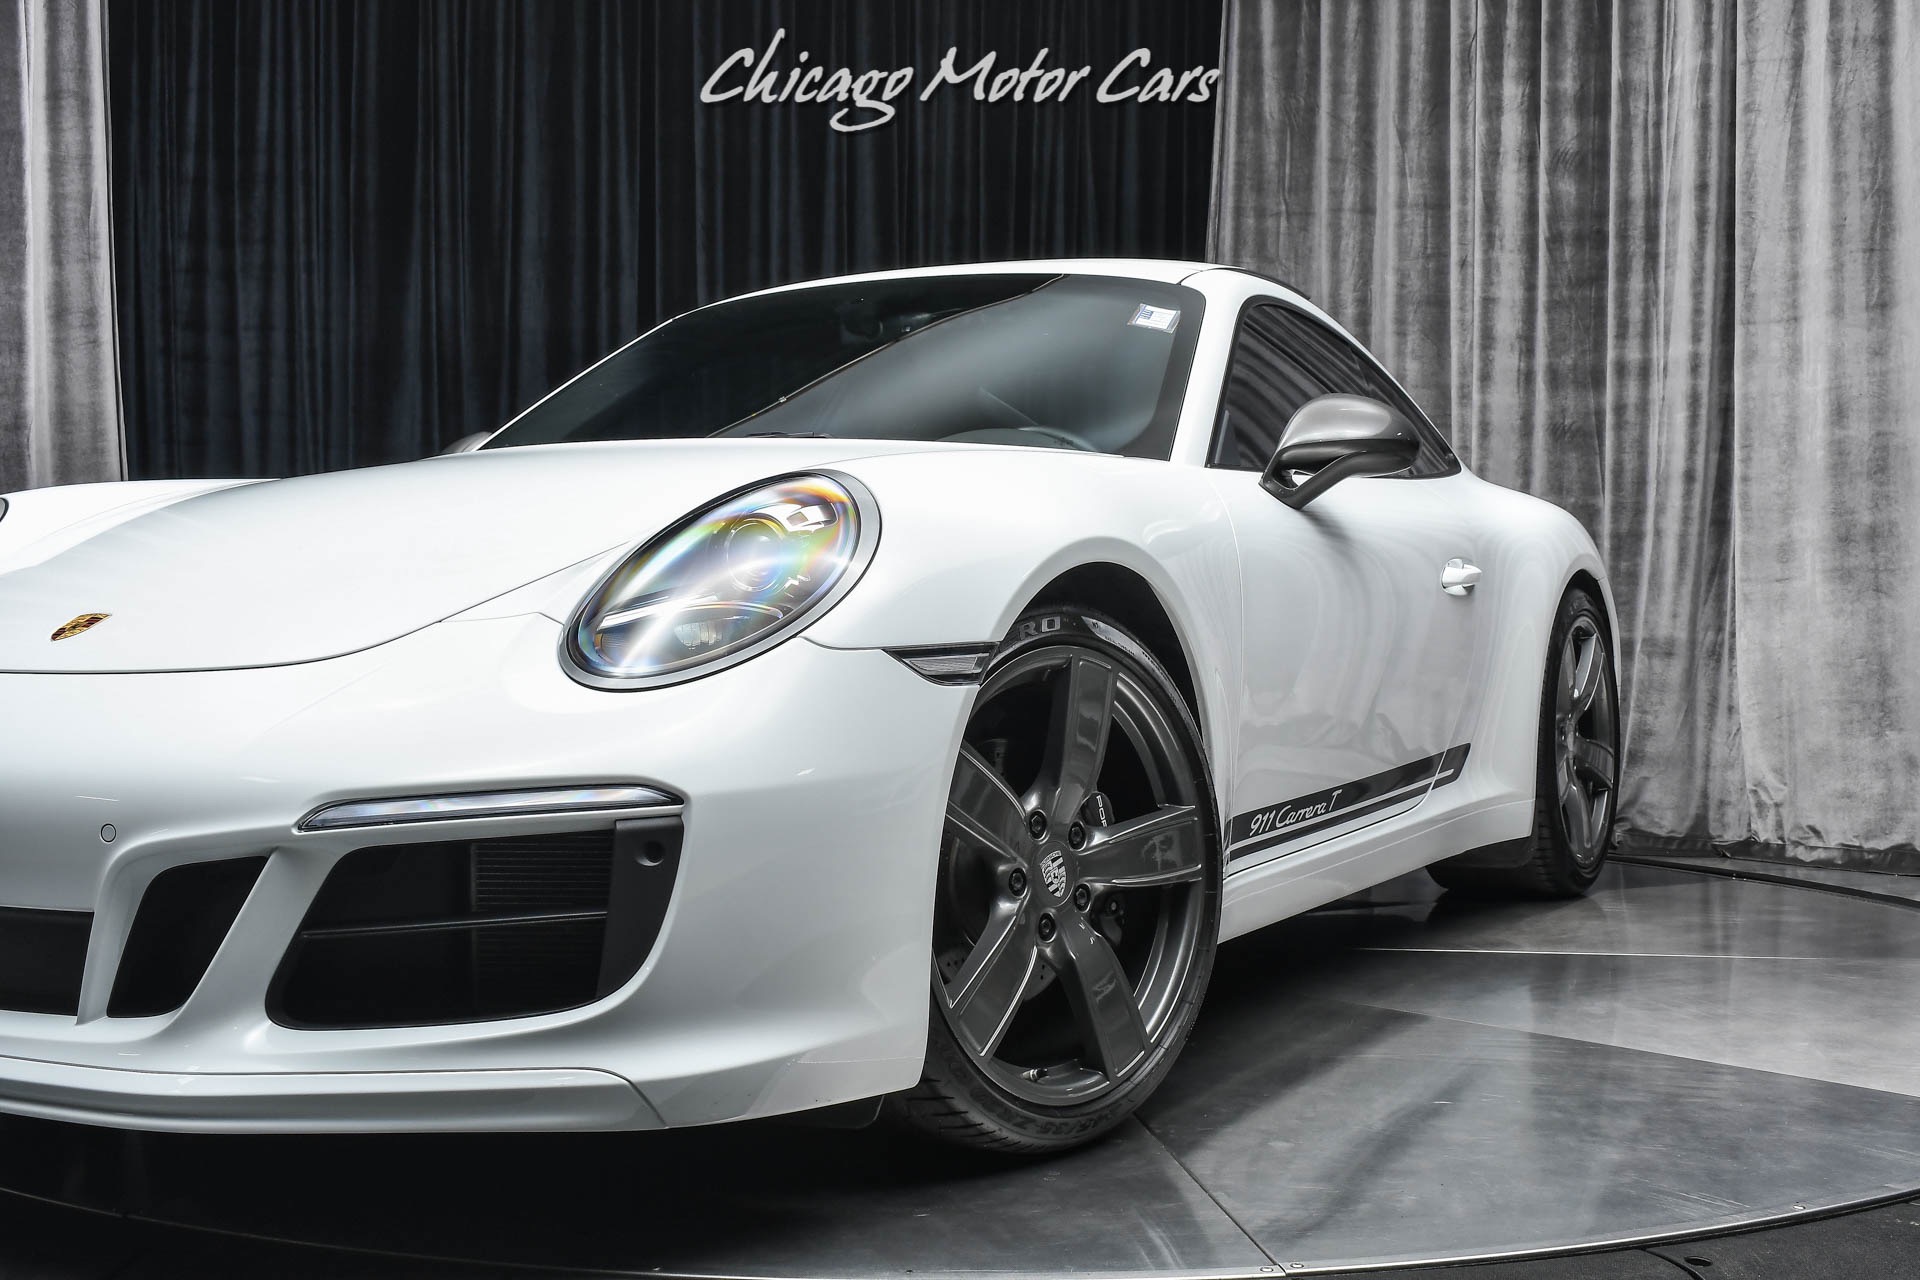 Used-2018-Porsche-911-Carrera-T-Coupe-MSRP-117K-CARRERA-T-INTERIOR-PACK-7-SPEED-MANUAL